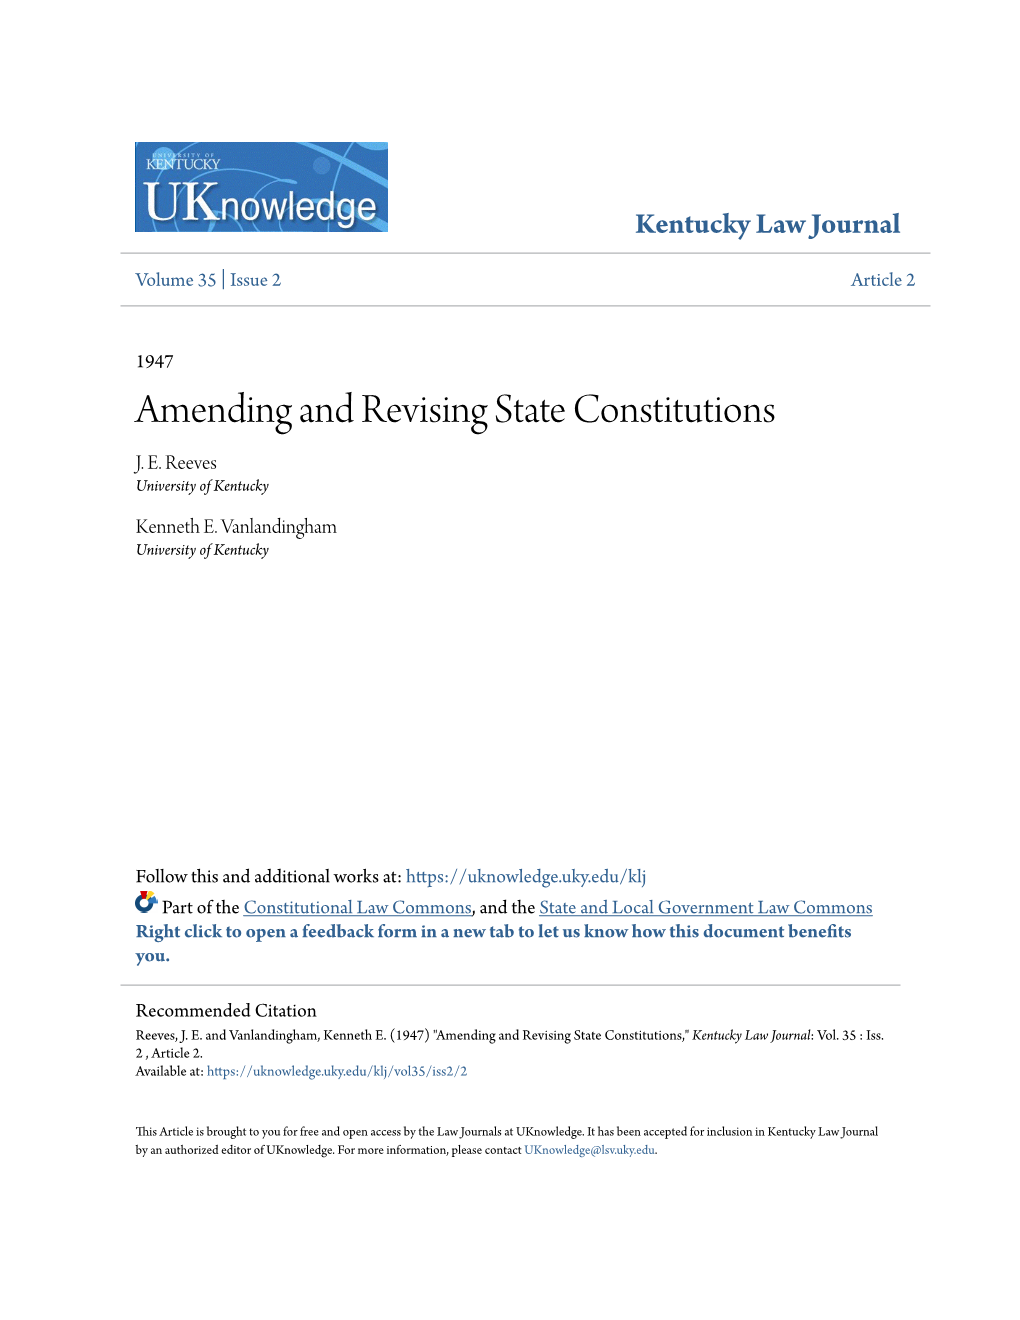 Amending and Revising State Constitutions J